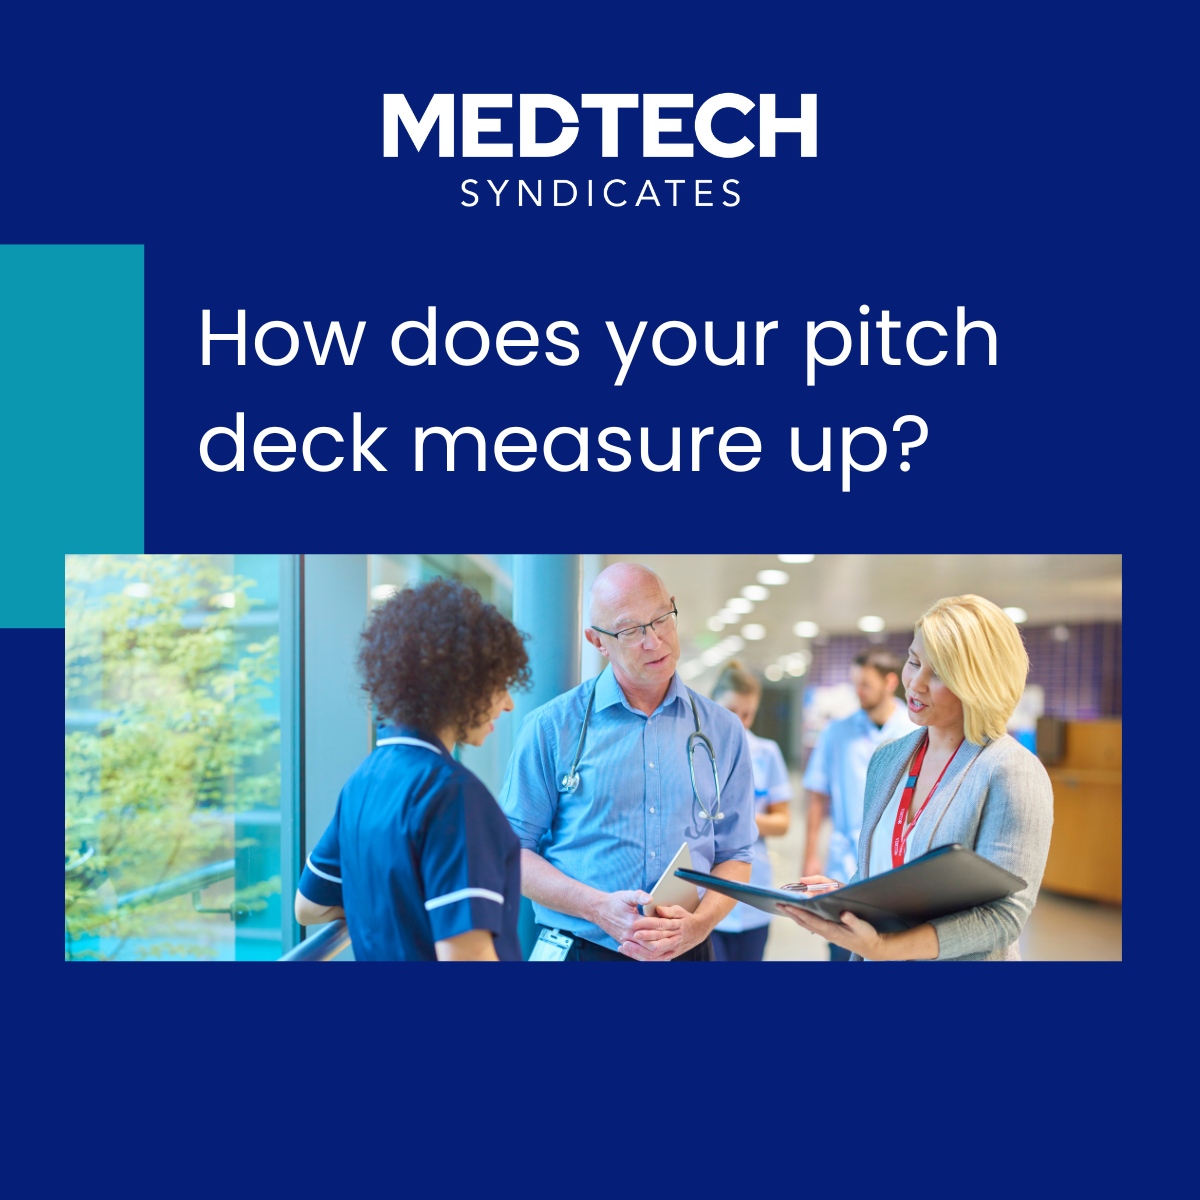 At MedTech Syndicates, we've guided MedTech startups through the intricacies of securing seed funding. The key? An impactful pitch. #MedTech #InvestorReady #SeedFunding #PitchDecks